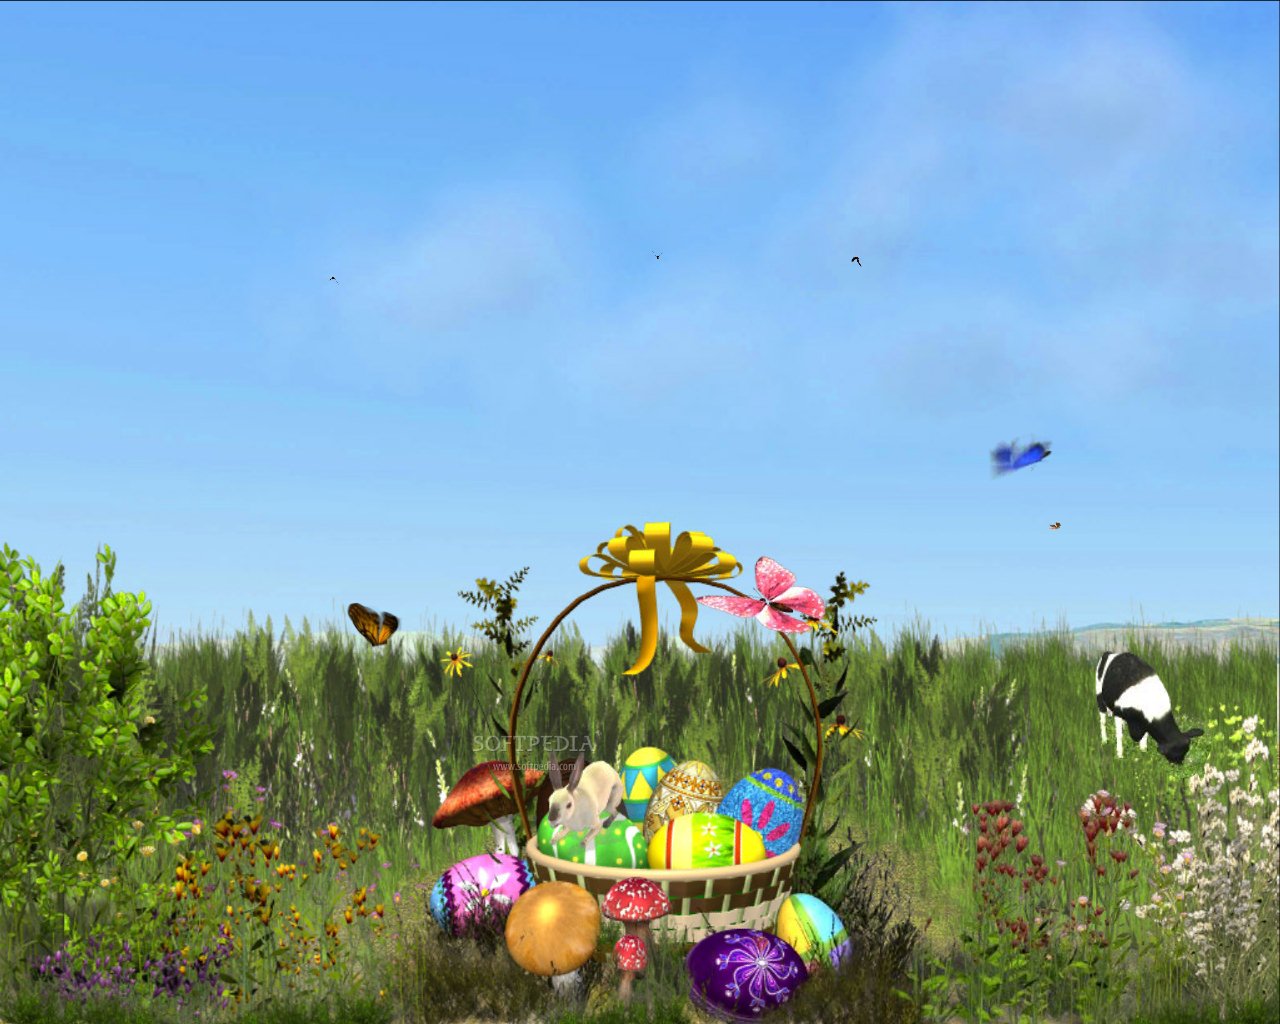 Easter Basket Animated Screensaver This Is The Image Displayed By